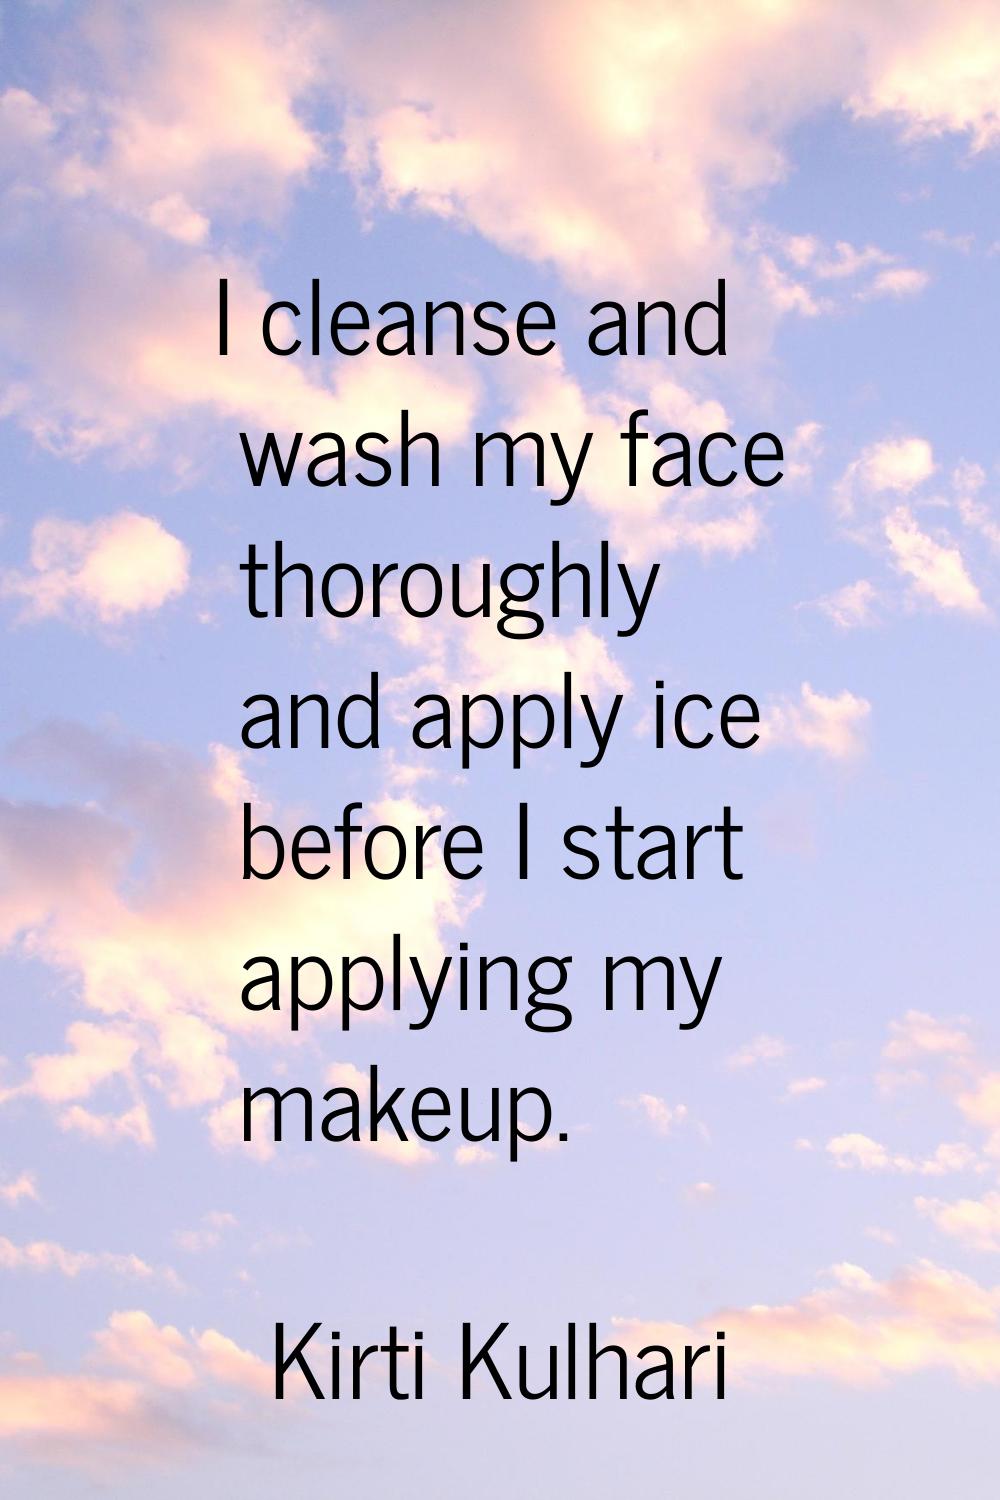 I cleanse and wash my face thoroughly and apply ice before I start applying my makeup.